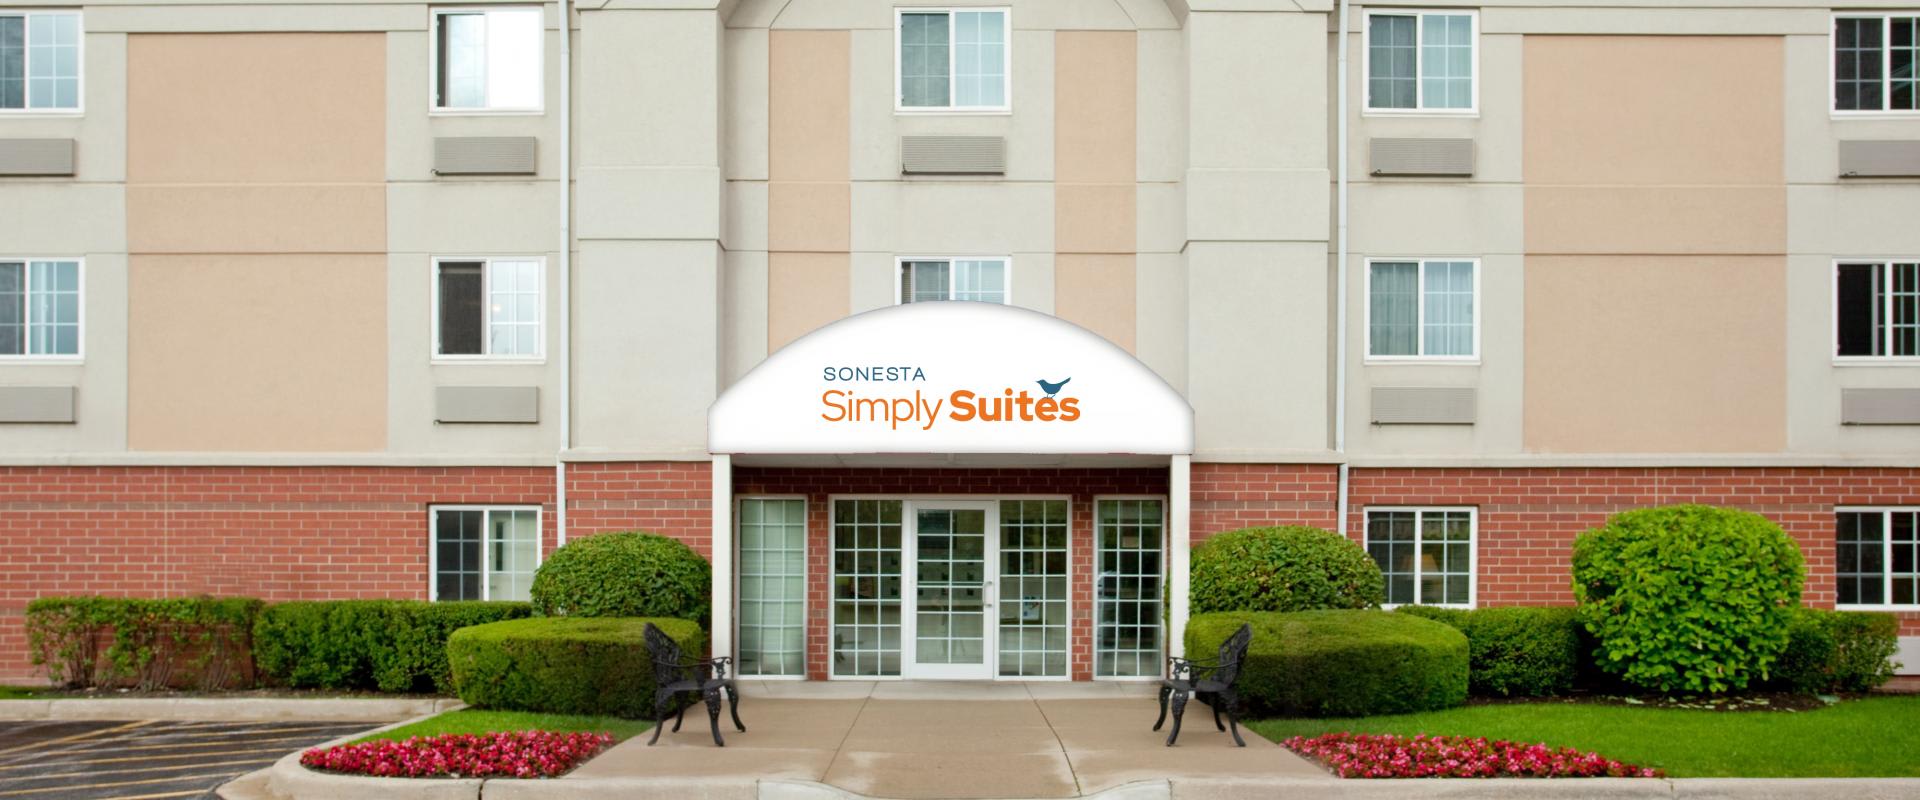 Simply Suites Chicago Libertyville Hotel Exterior Entrance